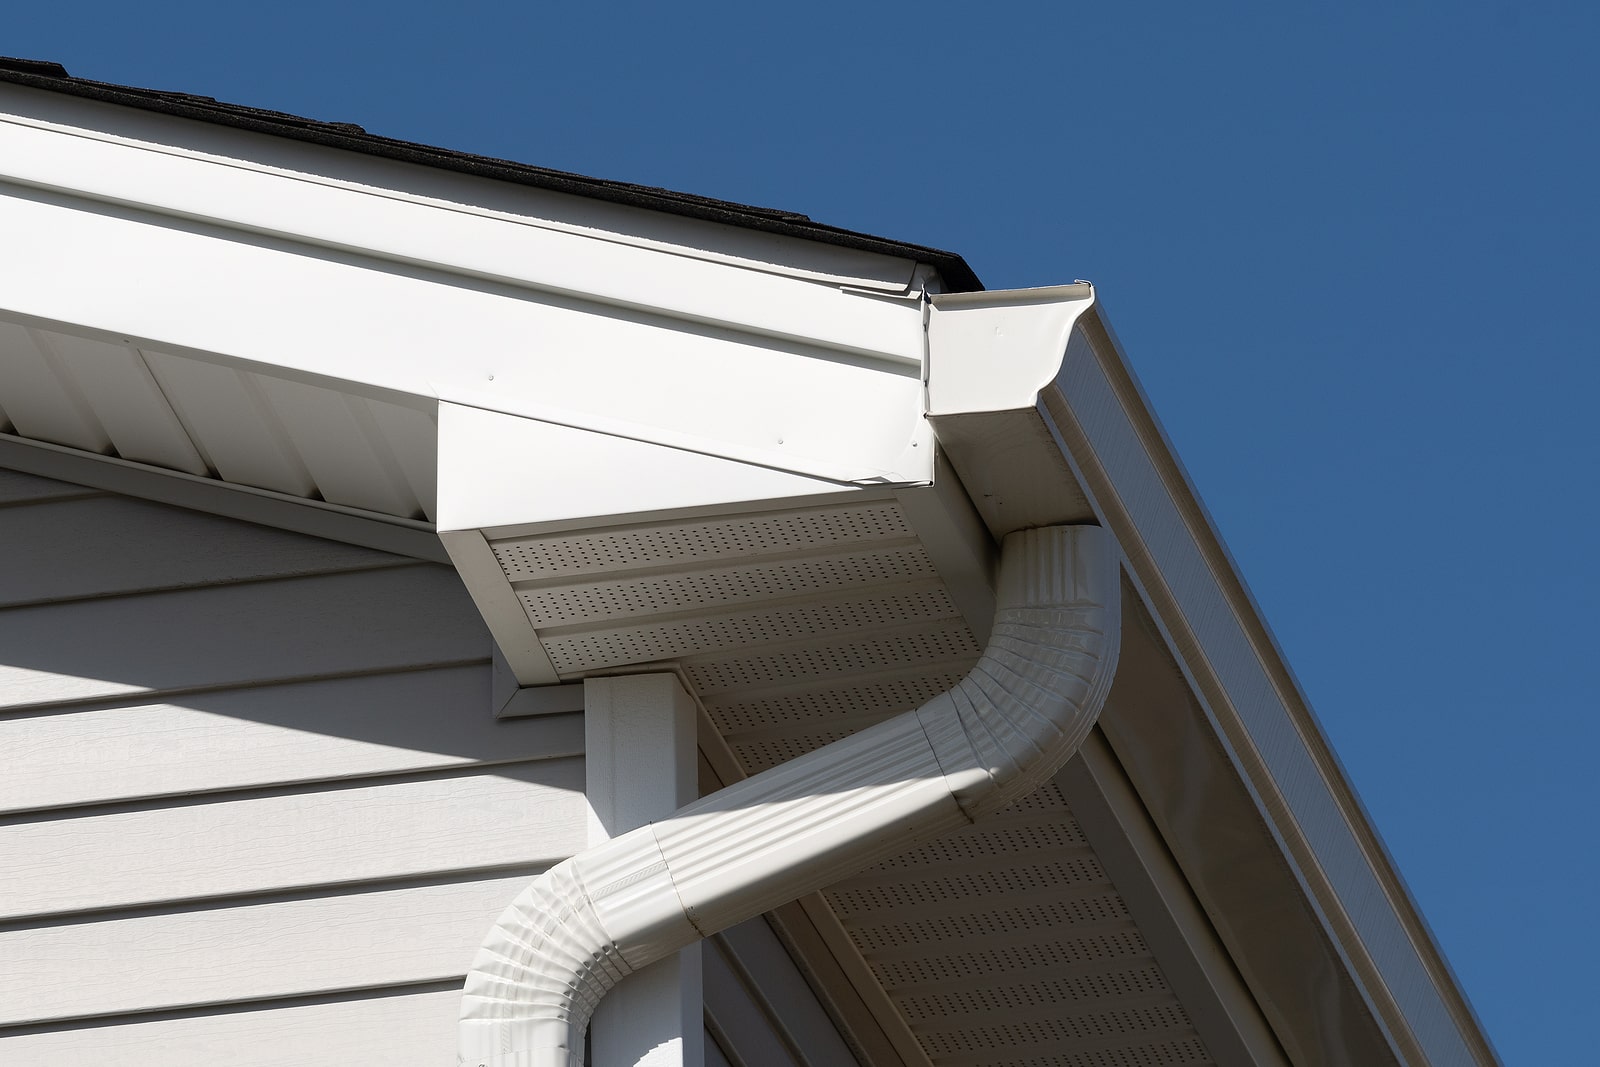 Siding and Gutter Replacement in Oxford, GA